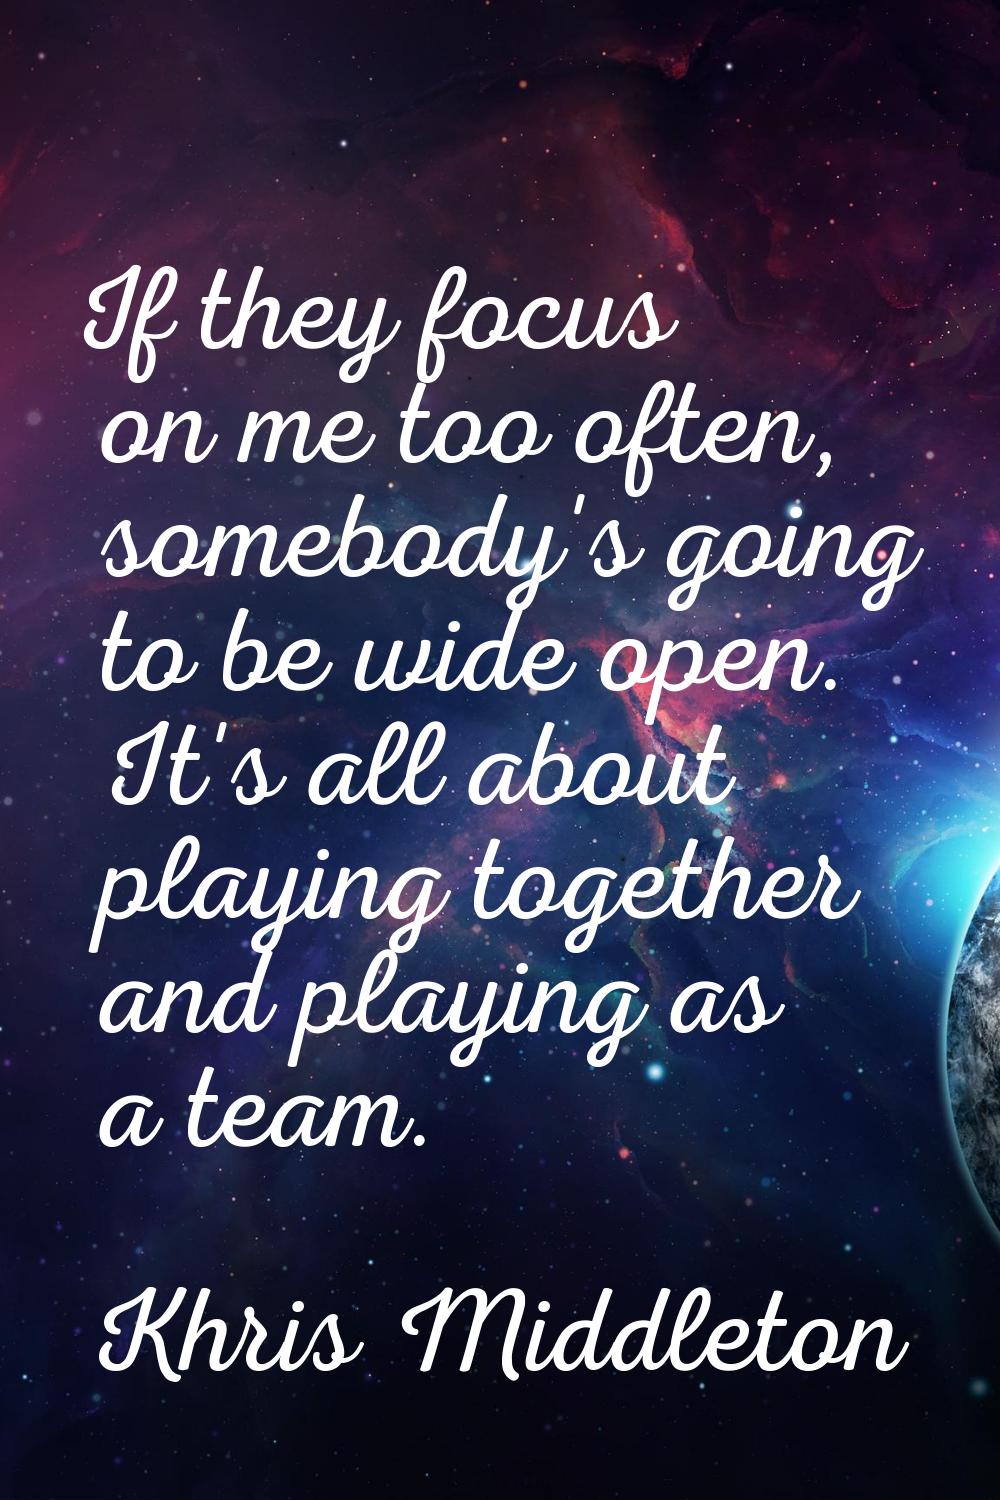 If they focus on me too often, somebody's going to be wide open. It's all about playing together an